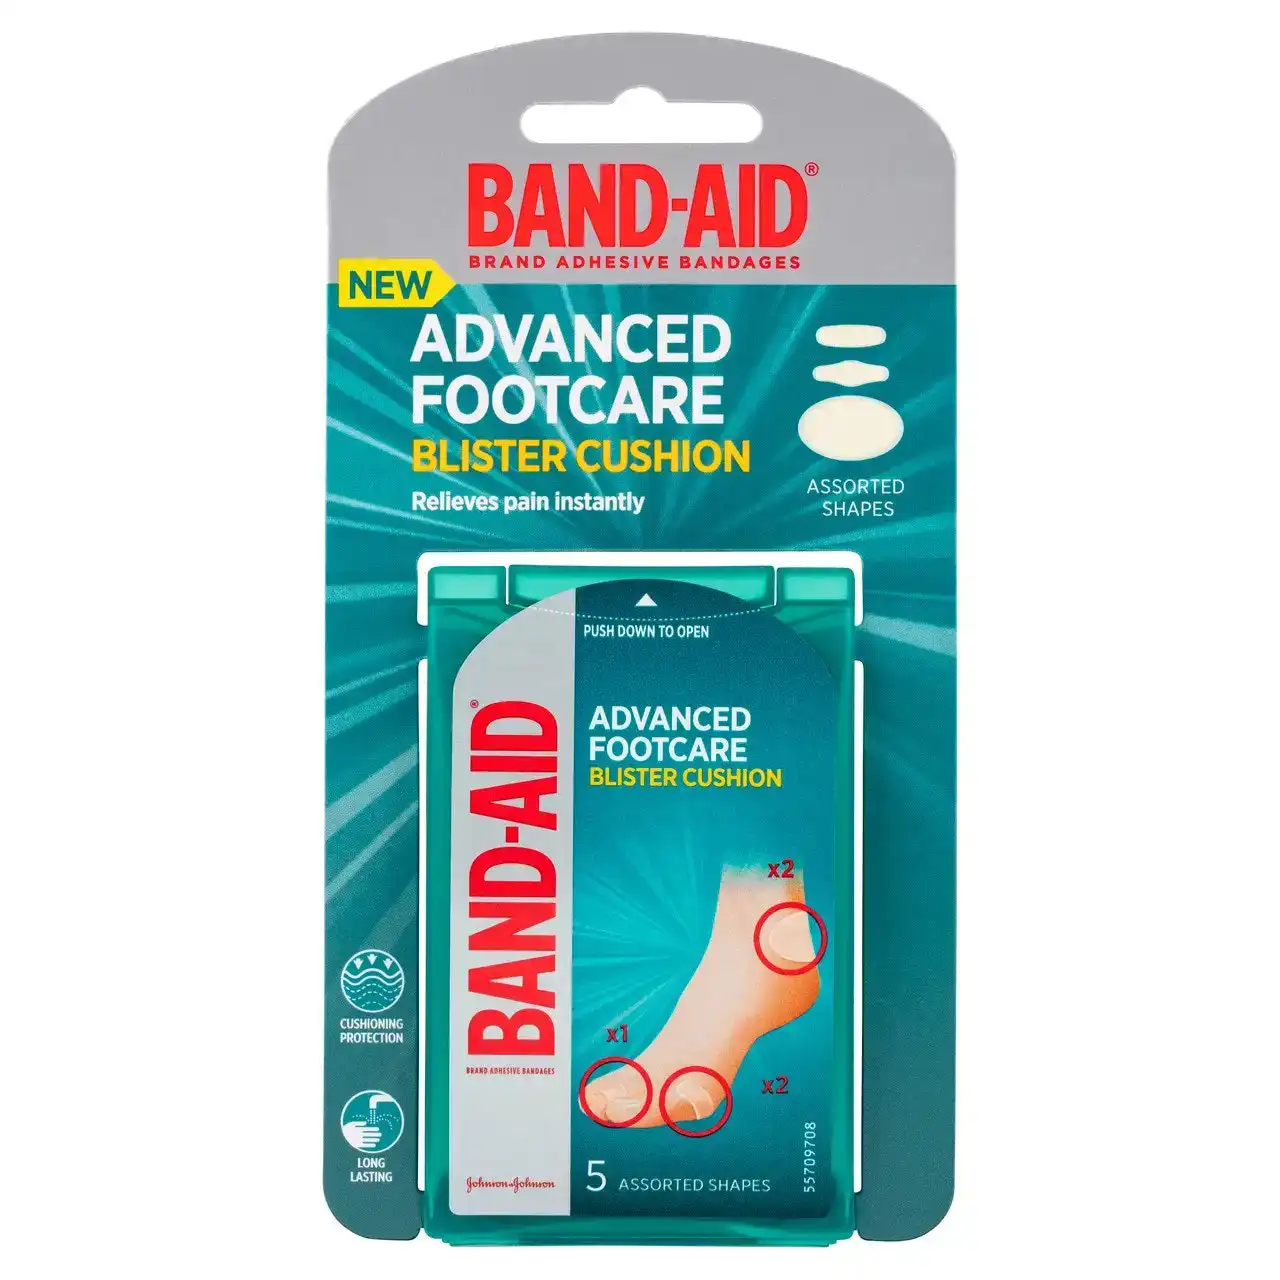 BAND-AID Advanced Footcare Blister Cushion Assorted Shapes 5 Pack